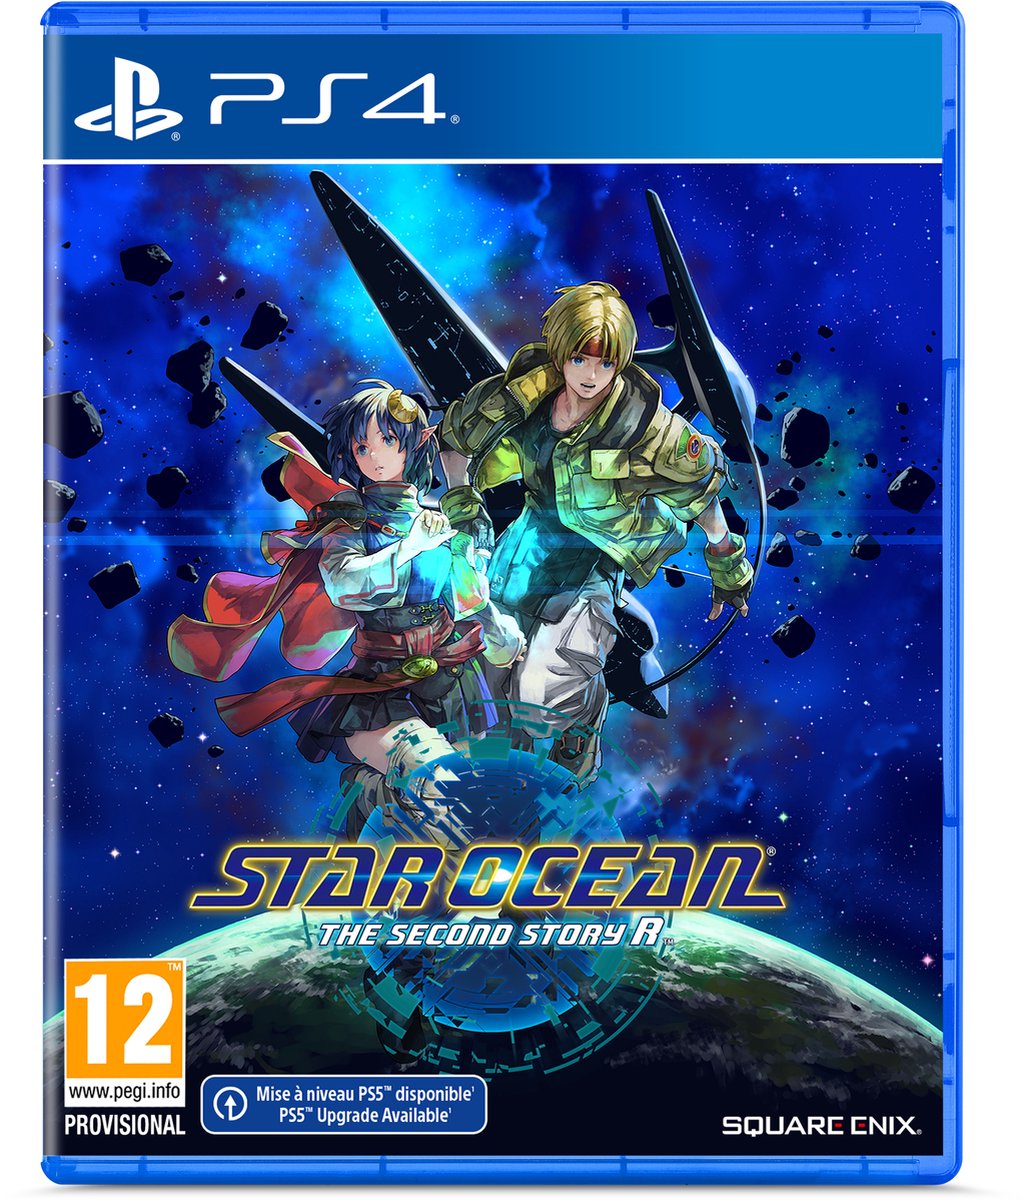 Star Ocean: The Second Story R (PS4), Square Enix